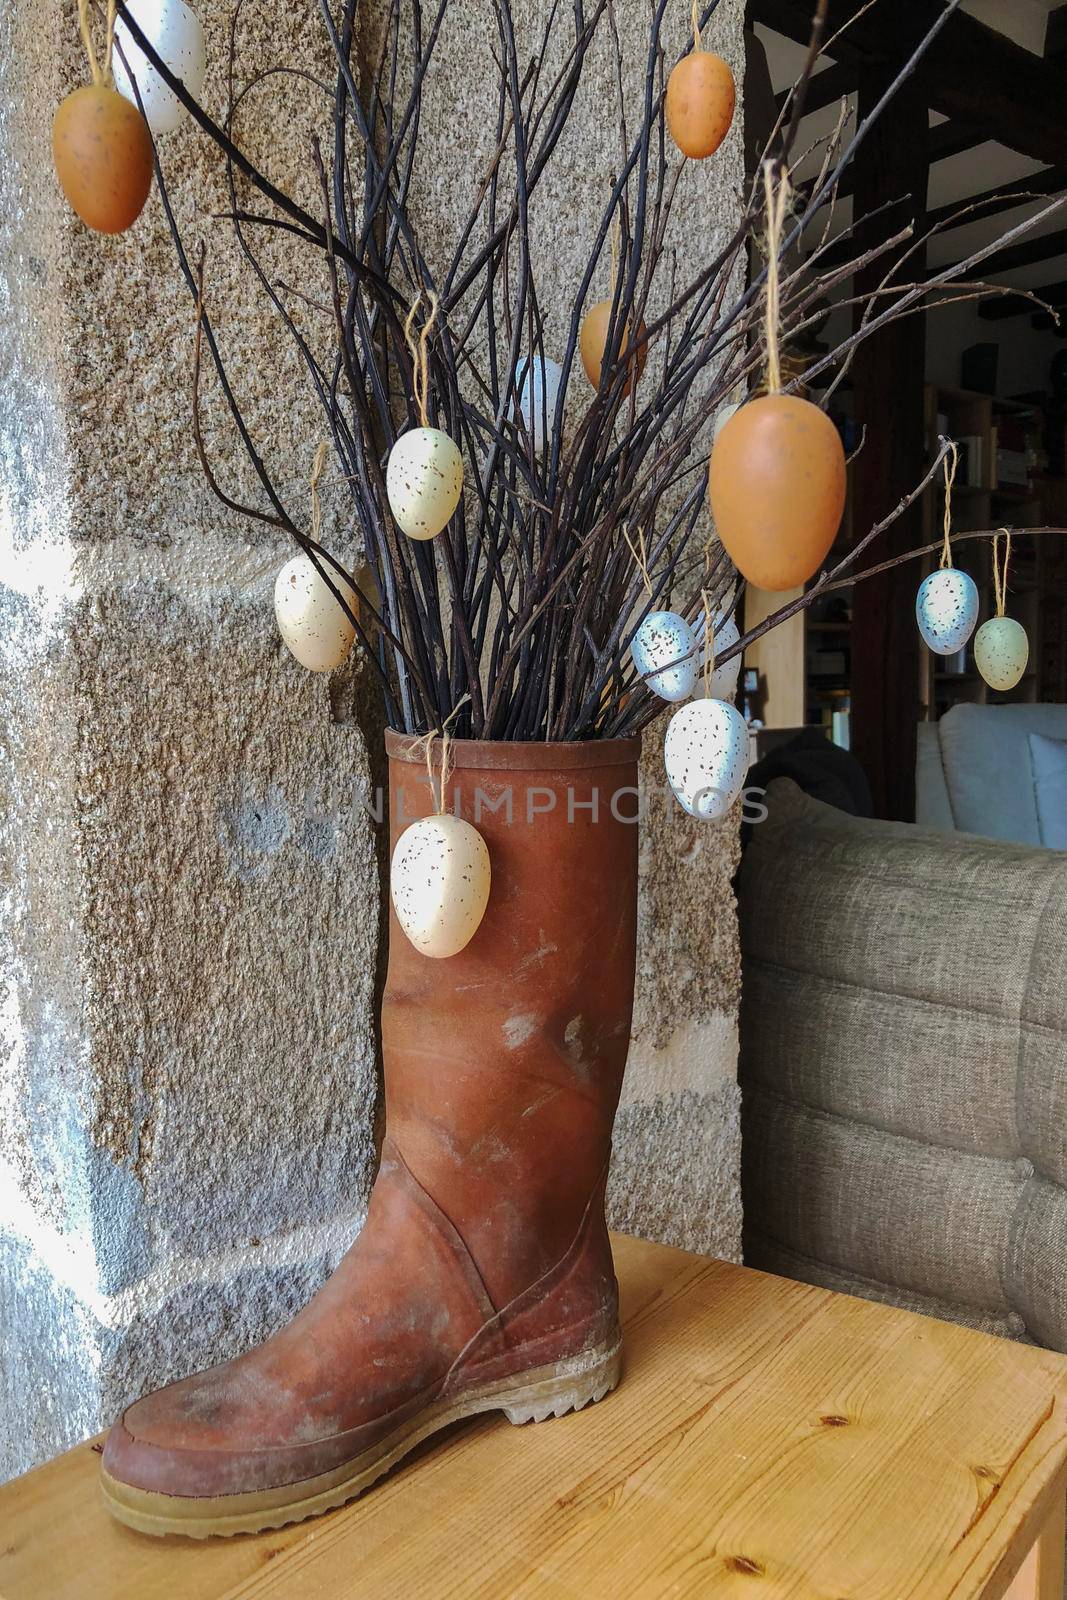 Branches with decorative eggs in a rubber boot Easter